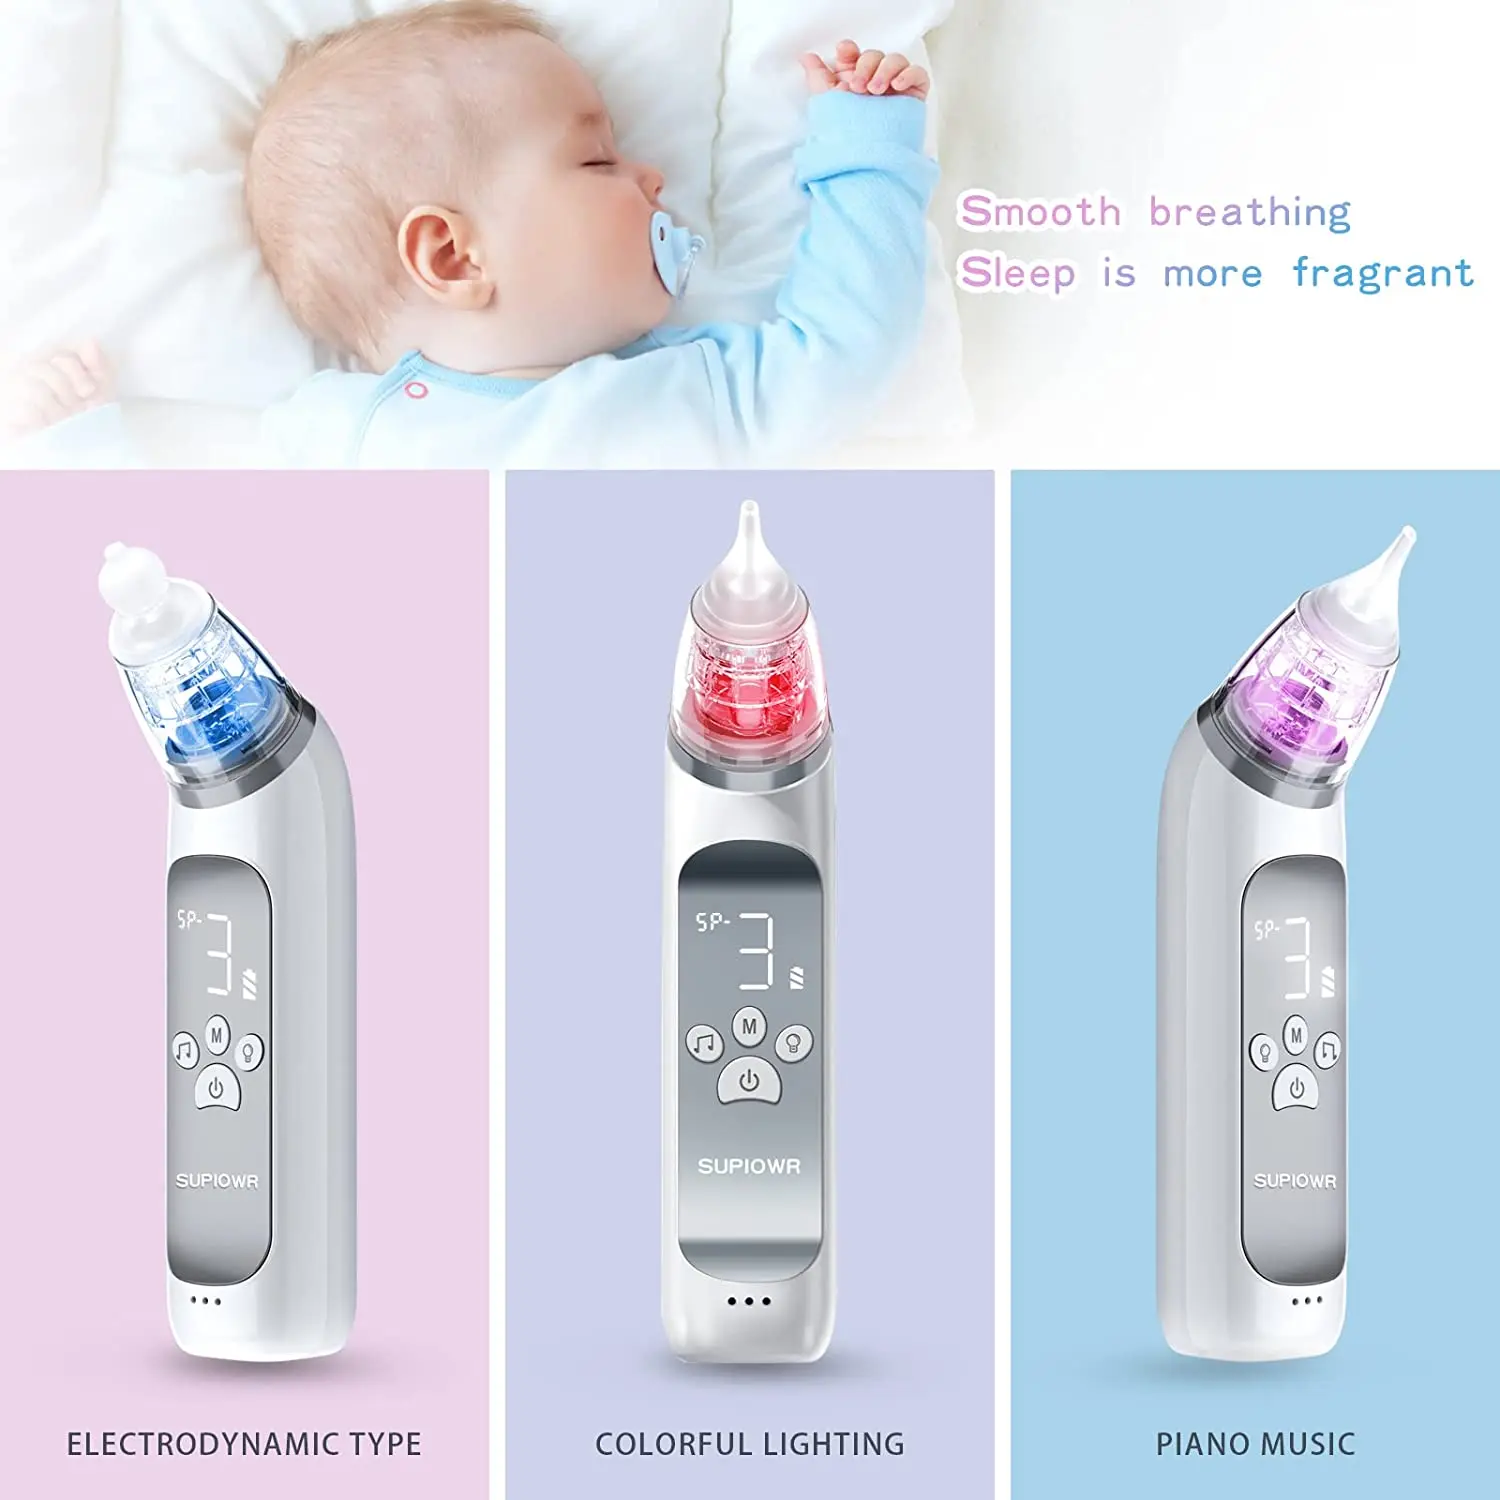 https://ae01.alicdn.com/kf/S05af6fd129a54879aa01ab0d02dcb8347/Baby-Electric-Nasal-Aspirator-Nose-Suction-Device-with-Food-Grade-Silicone-Mouthpiece-3-Suction-Modes-and.jpg